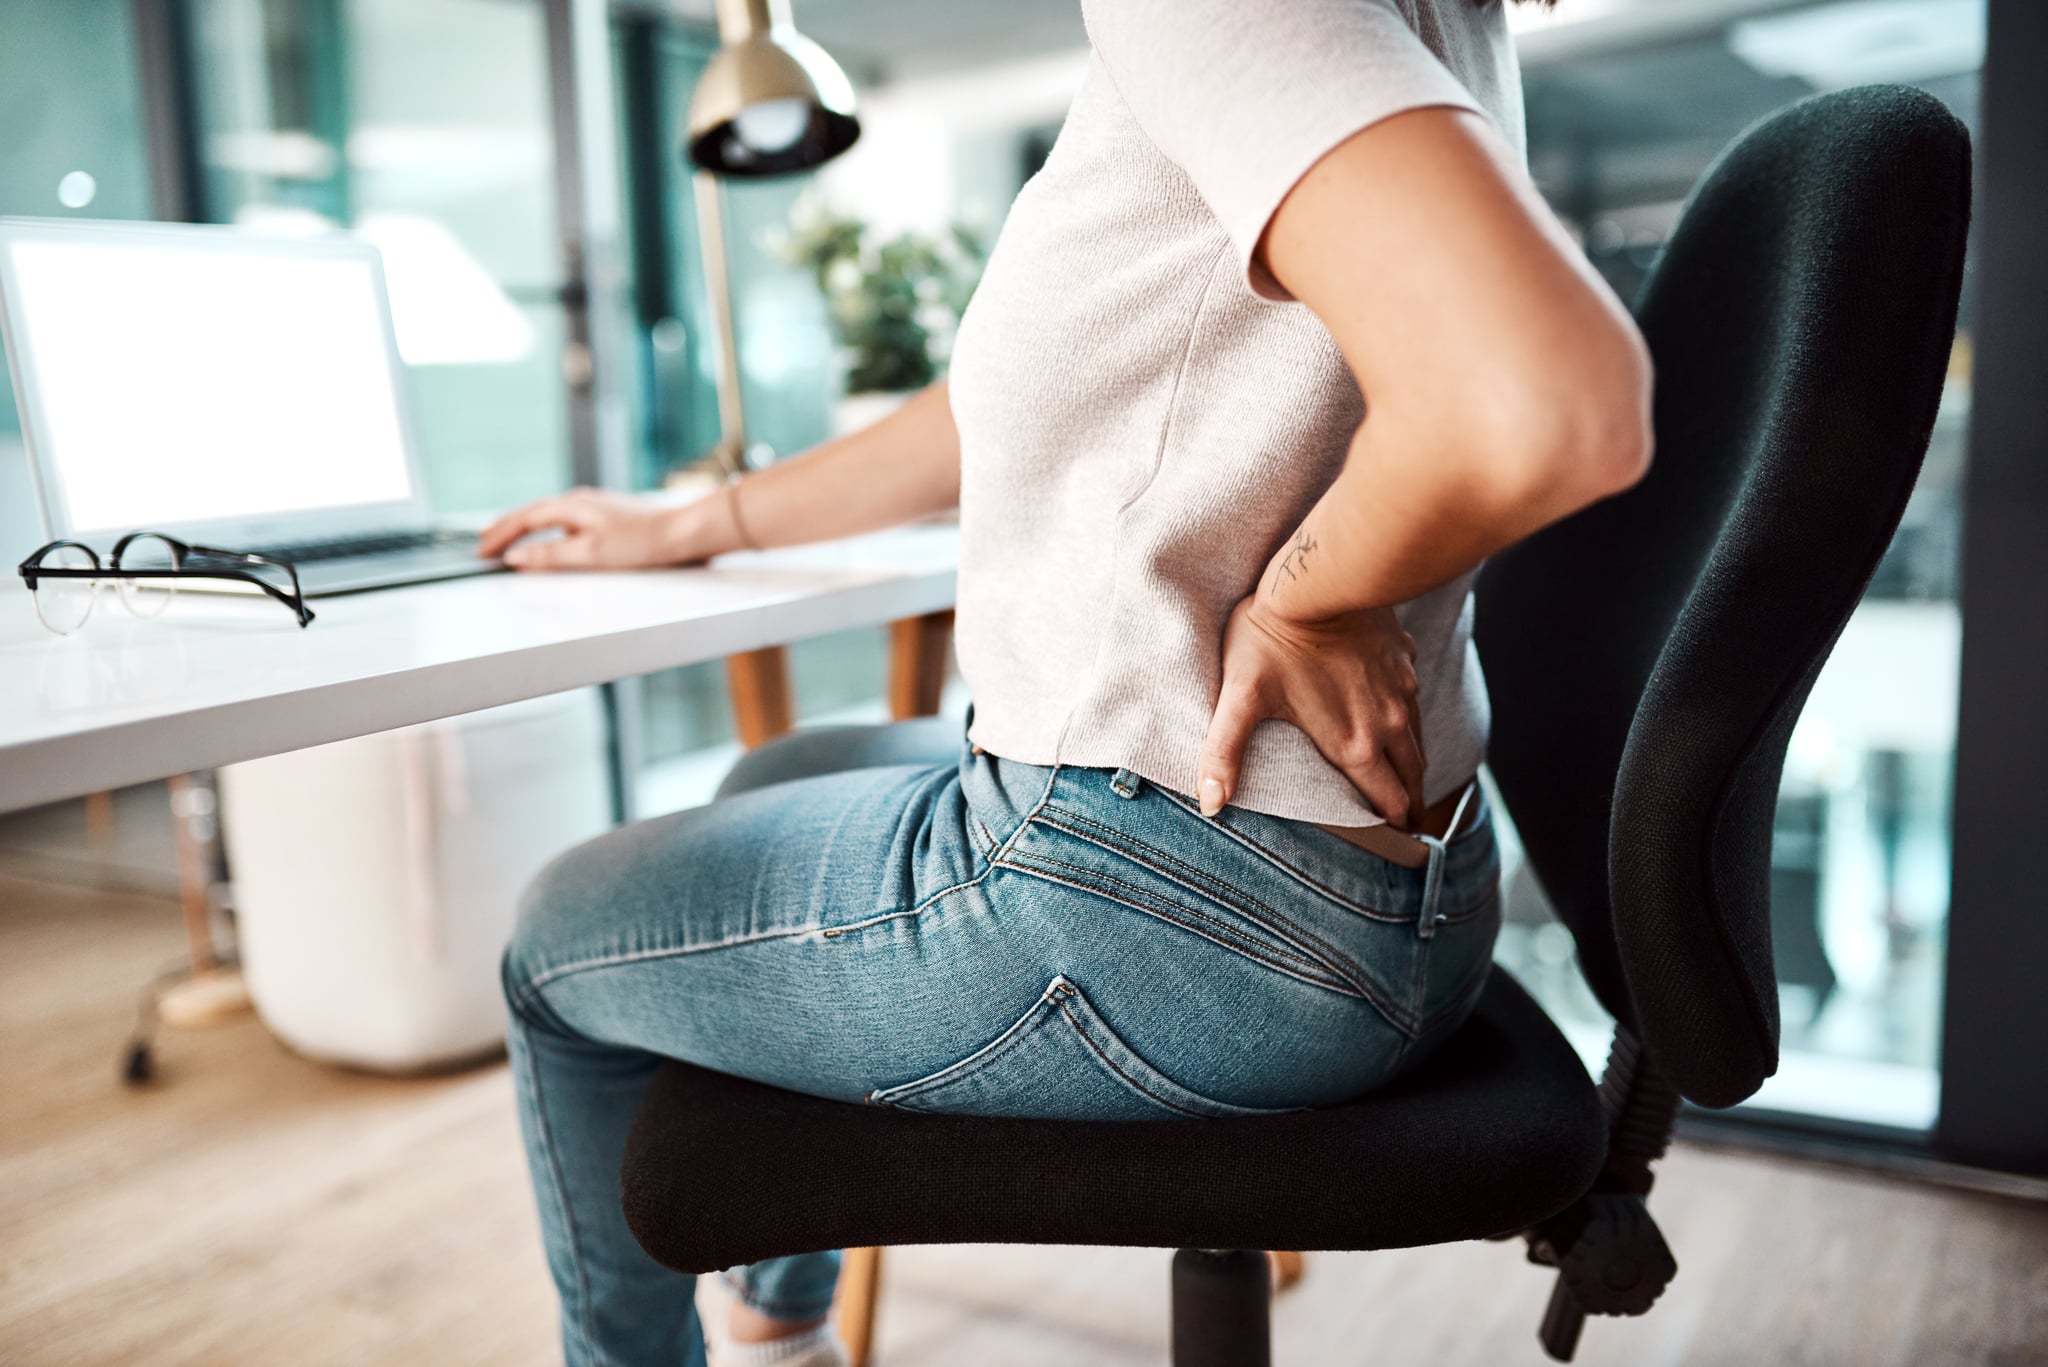 Closeup shot of an unrecognisable businesswoman experiencing back pain while working in an office